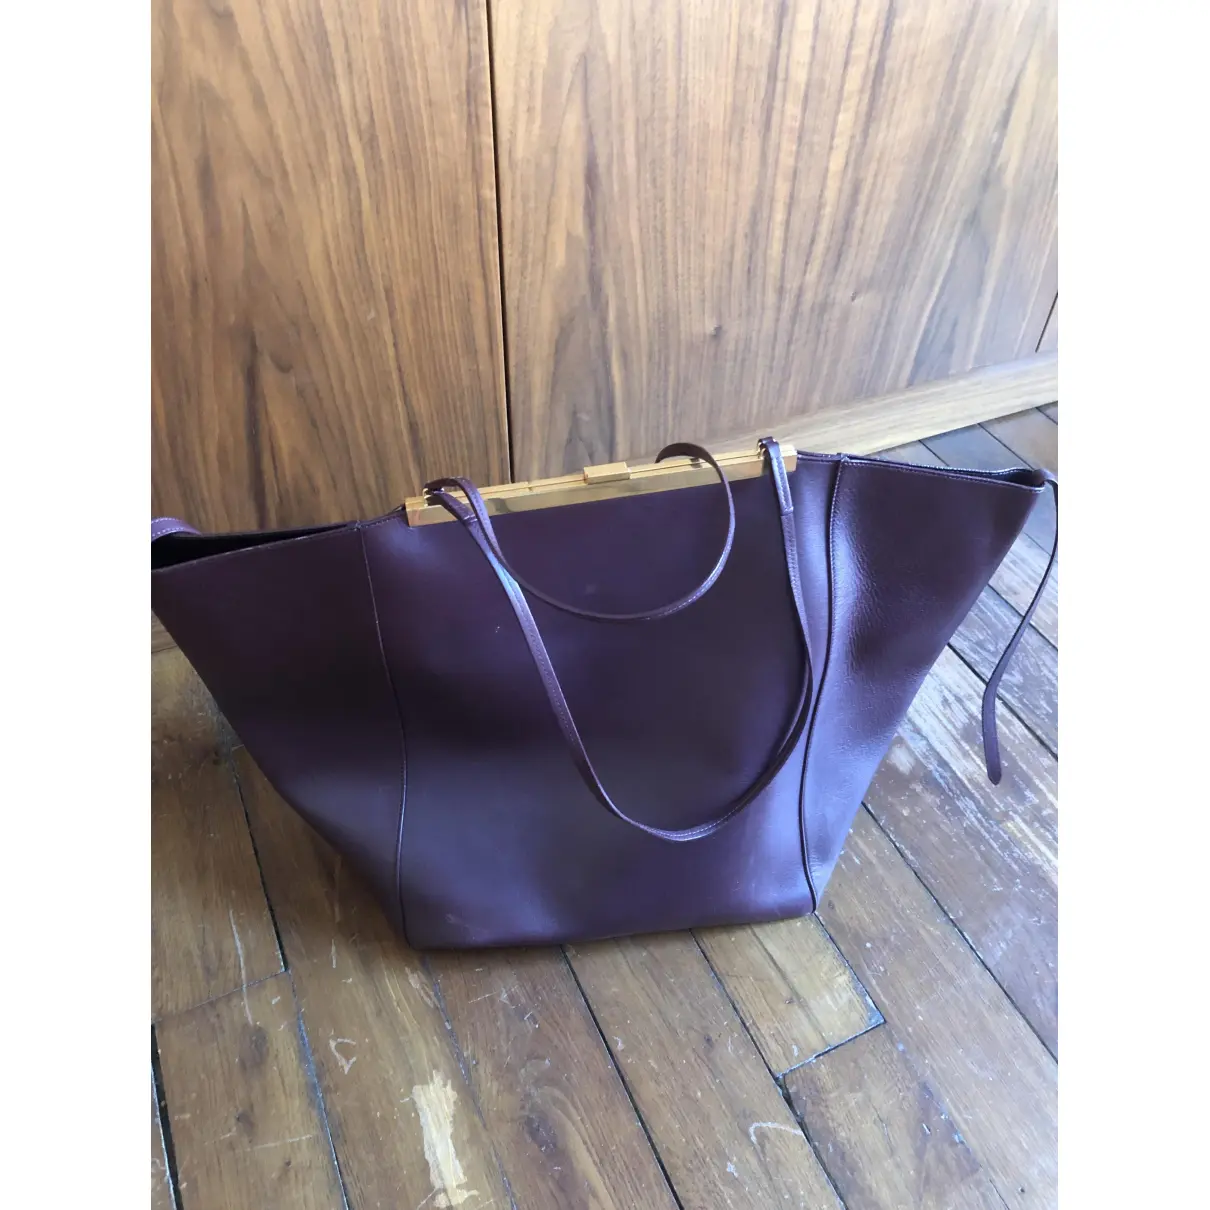 Buy Celine Clasp leather tote online